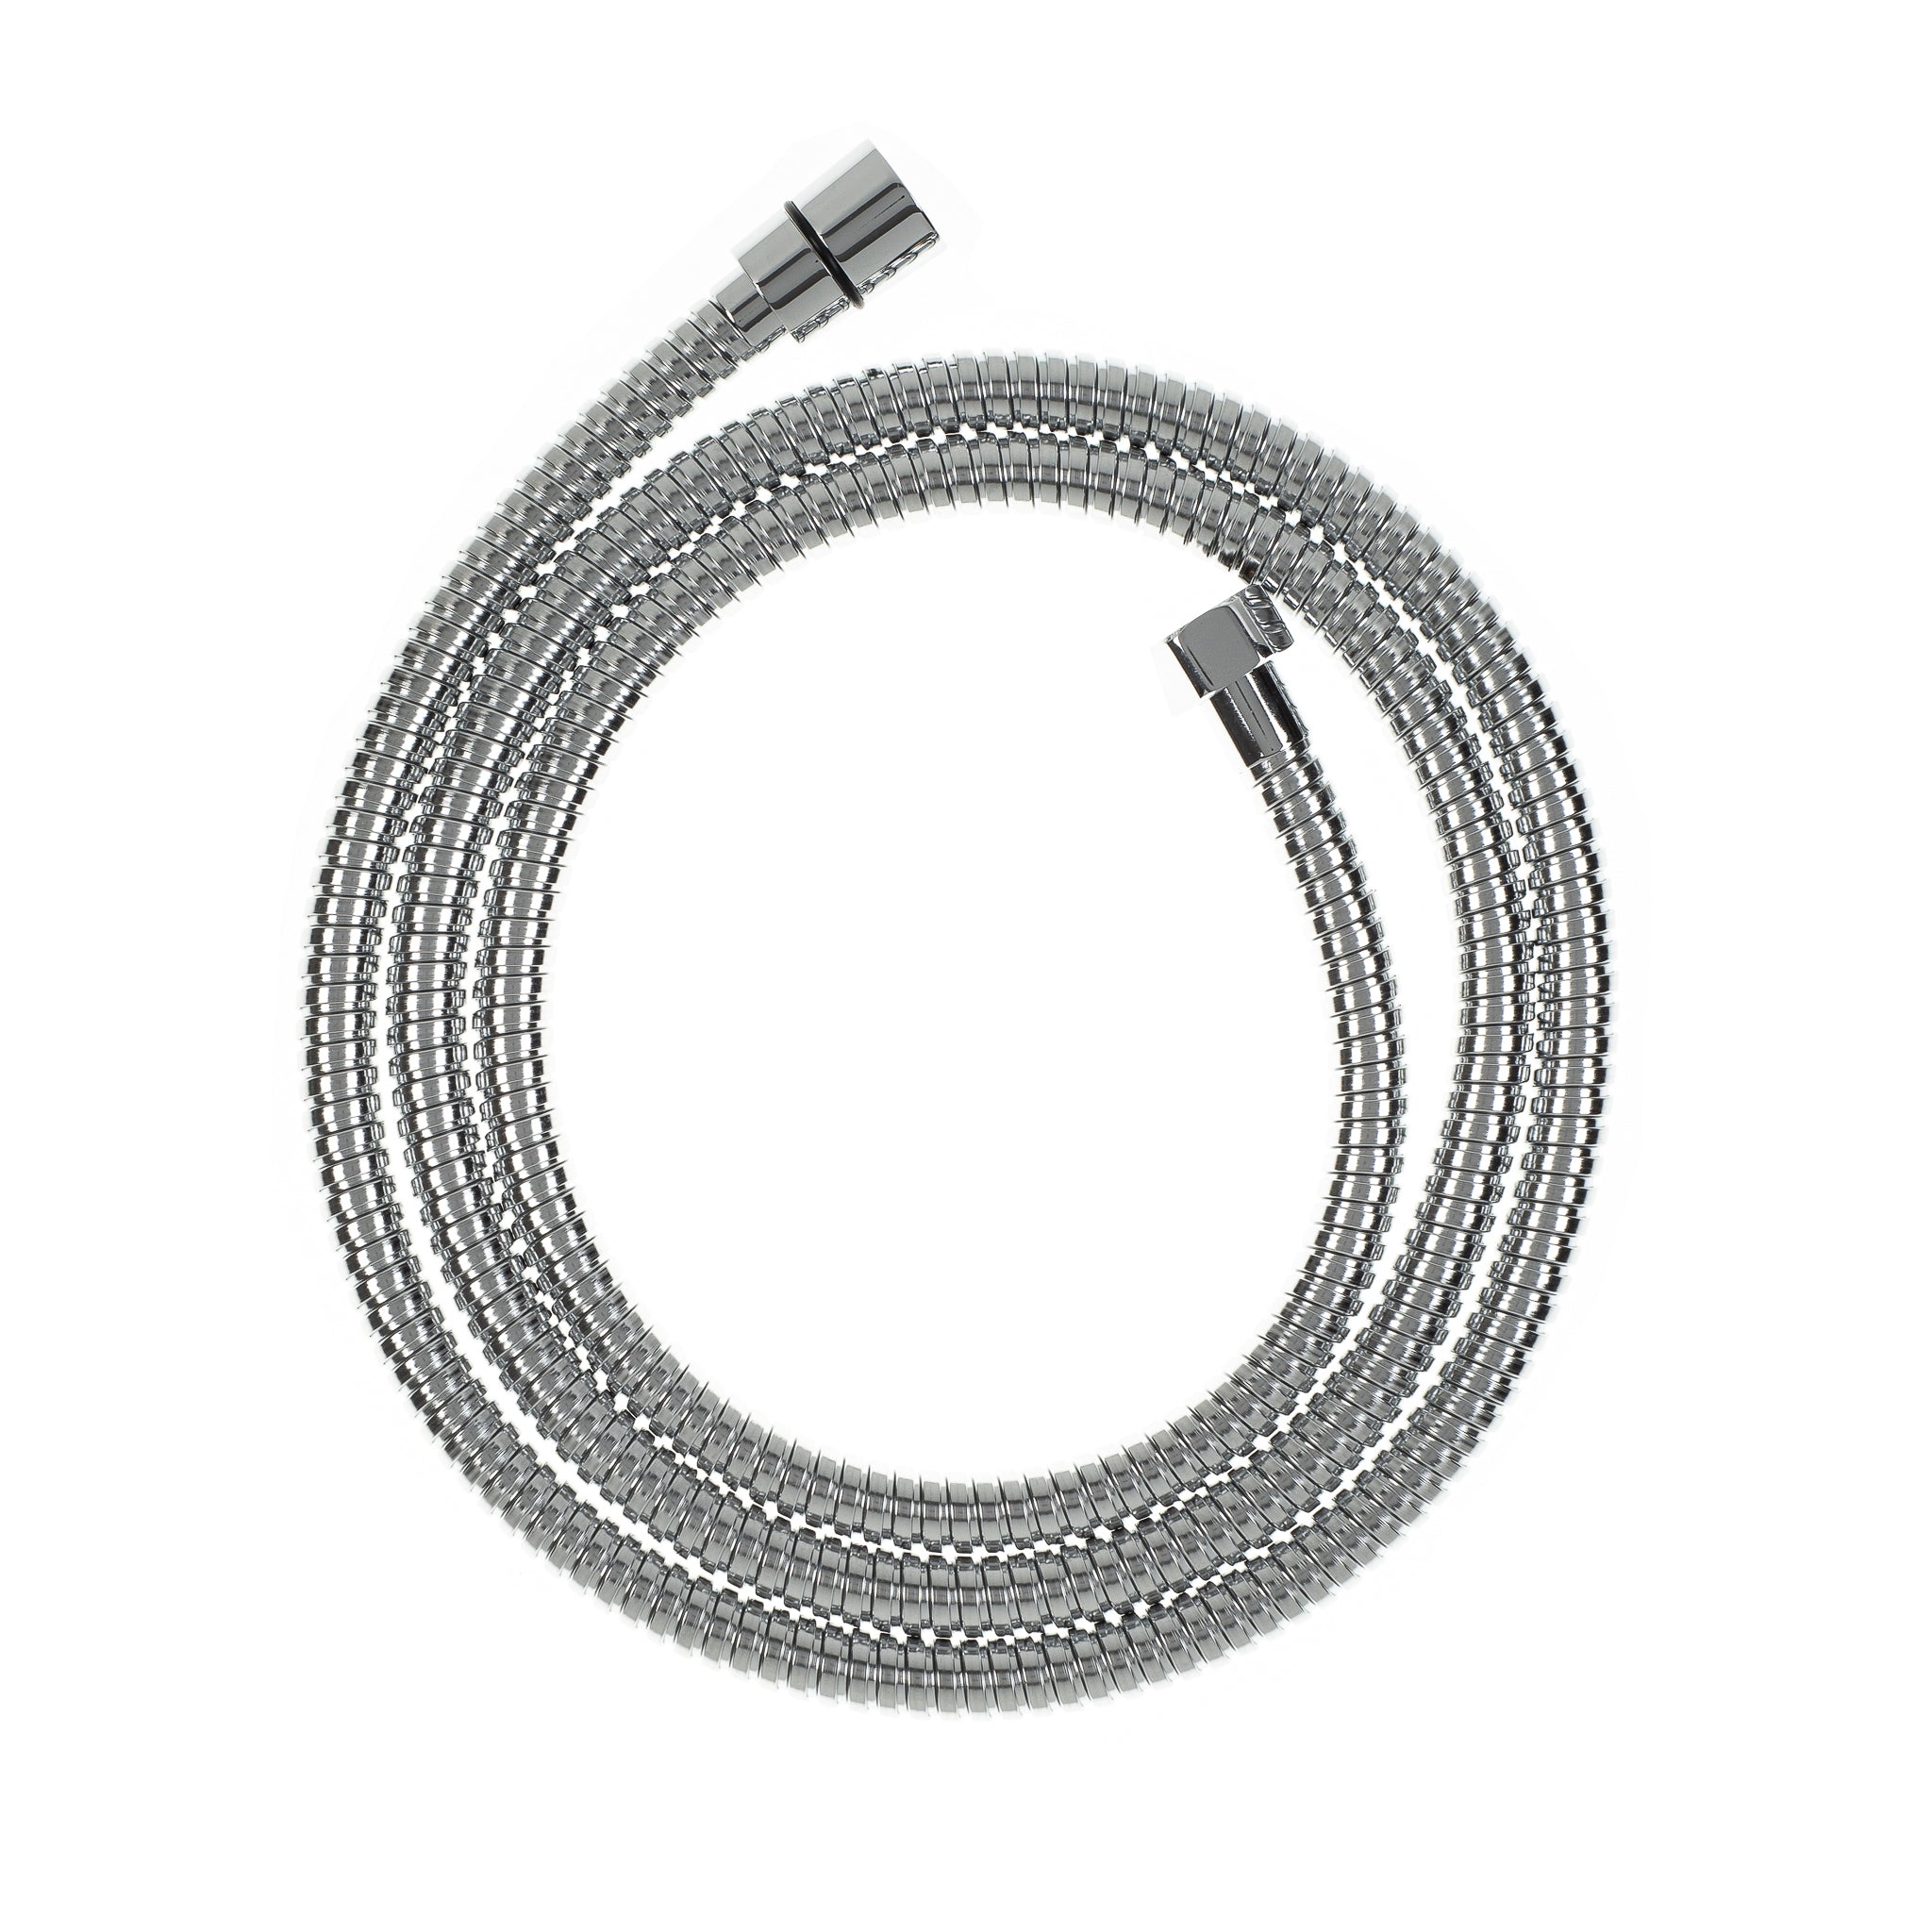 Stainless Steel Shower Hose - 1800mm, Polished Chrome